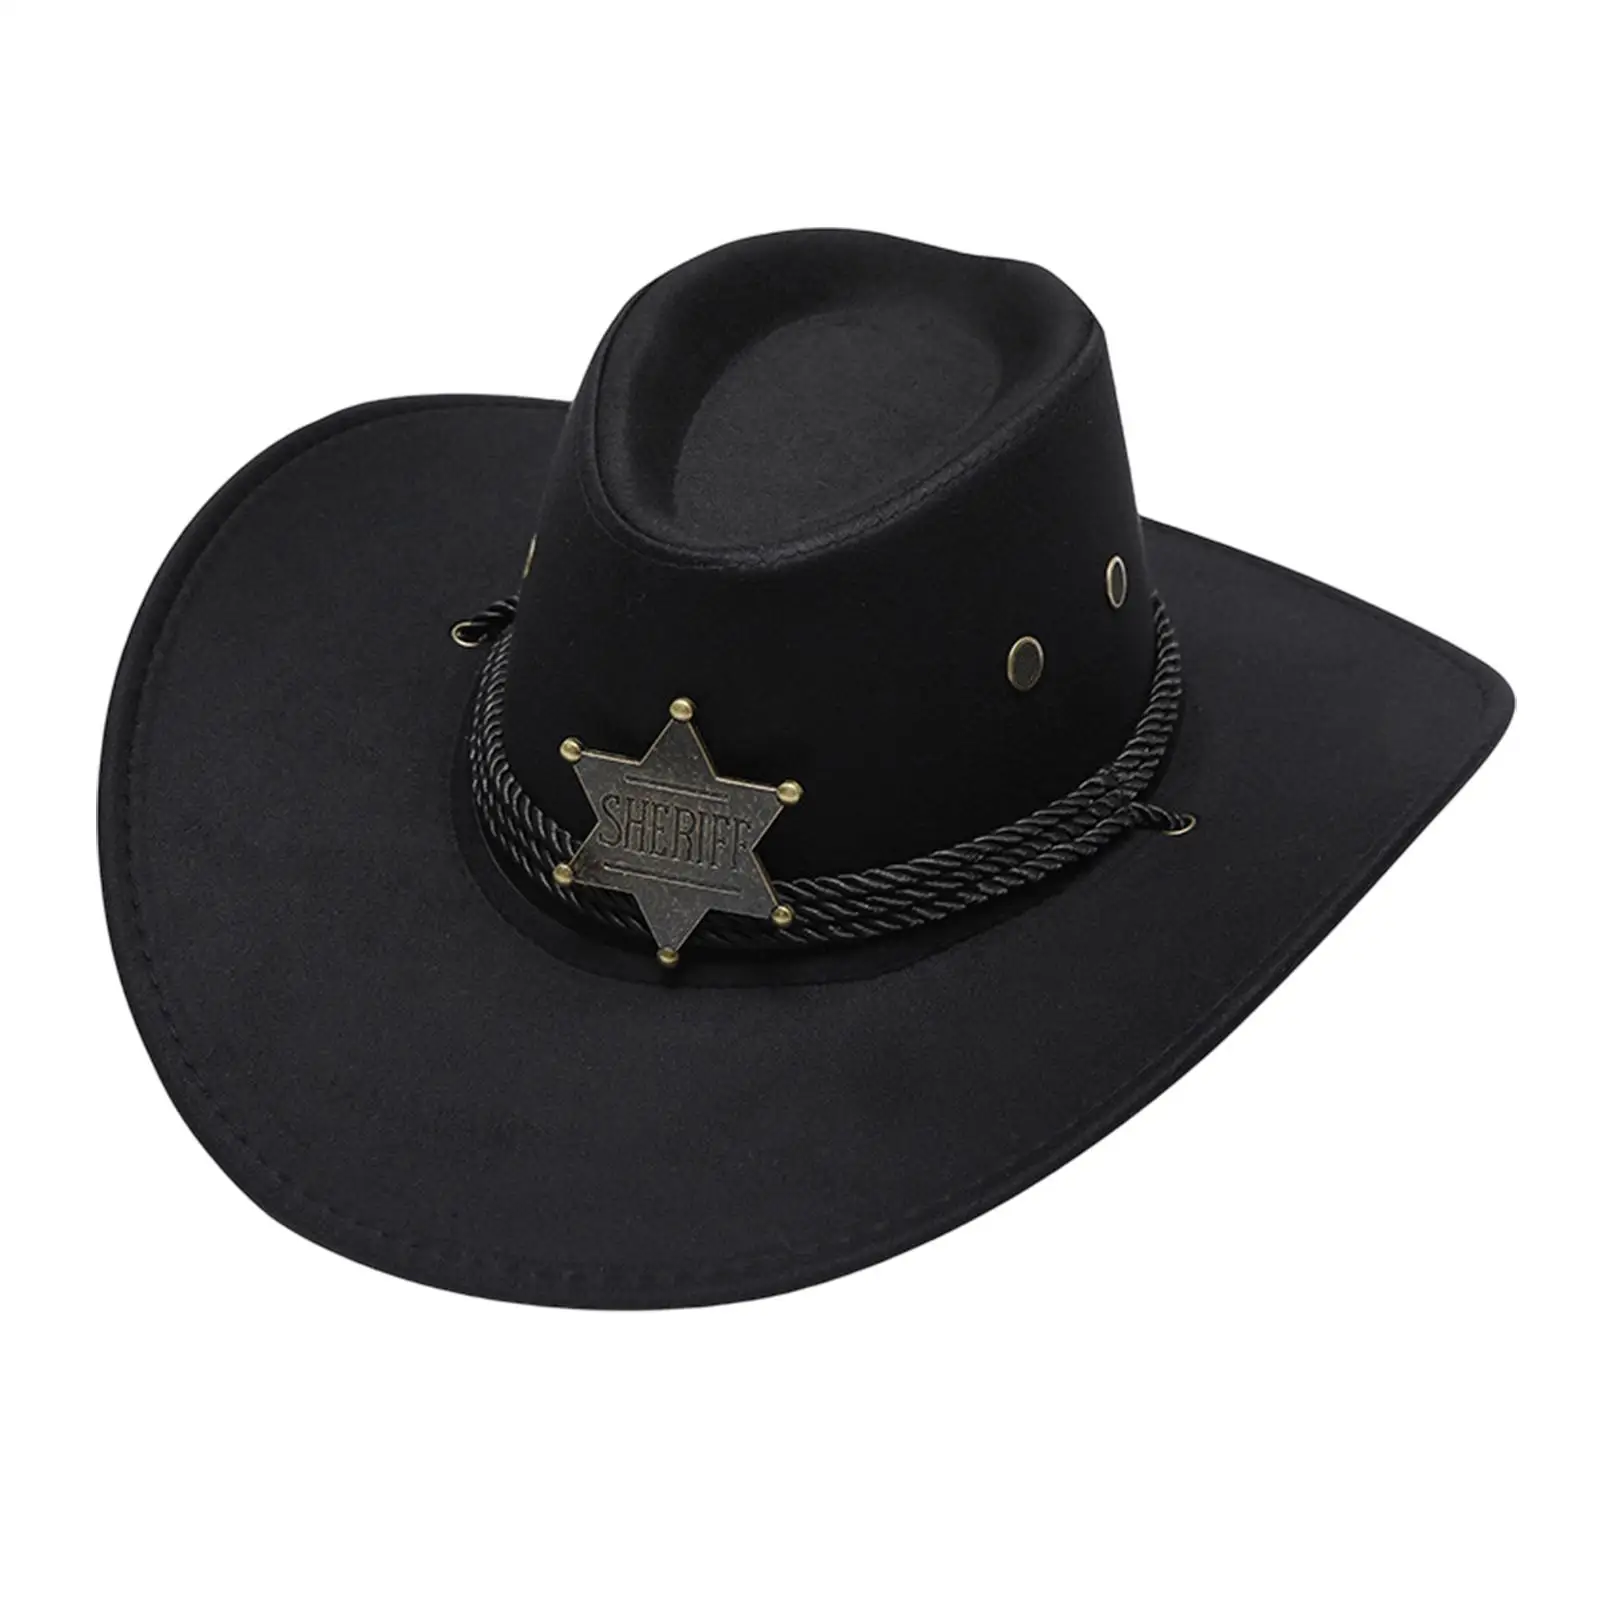 Cowboy Hat Wide Brim Unisex Adult Comfortable Sunhat Cowgirl Hat Sun Hat for Fishing Street Holidays Hiking Stage Performance